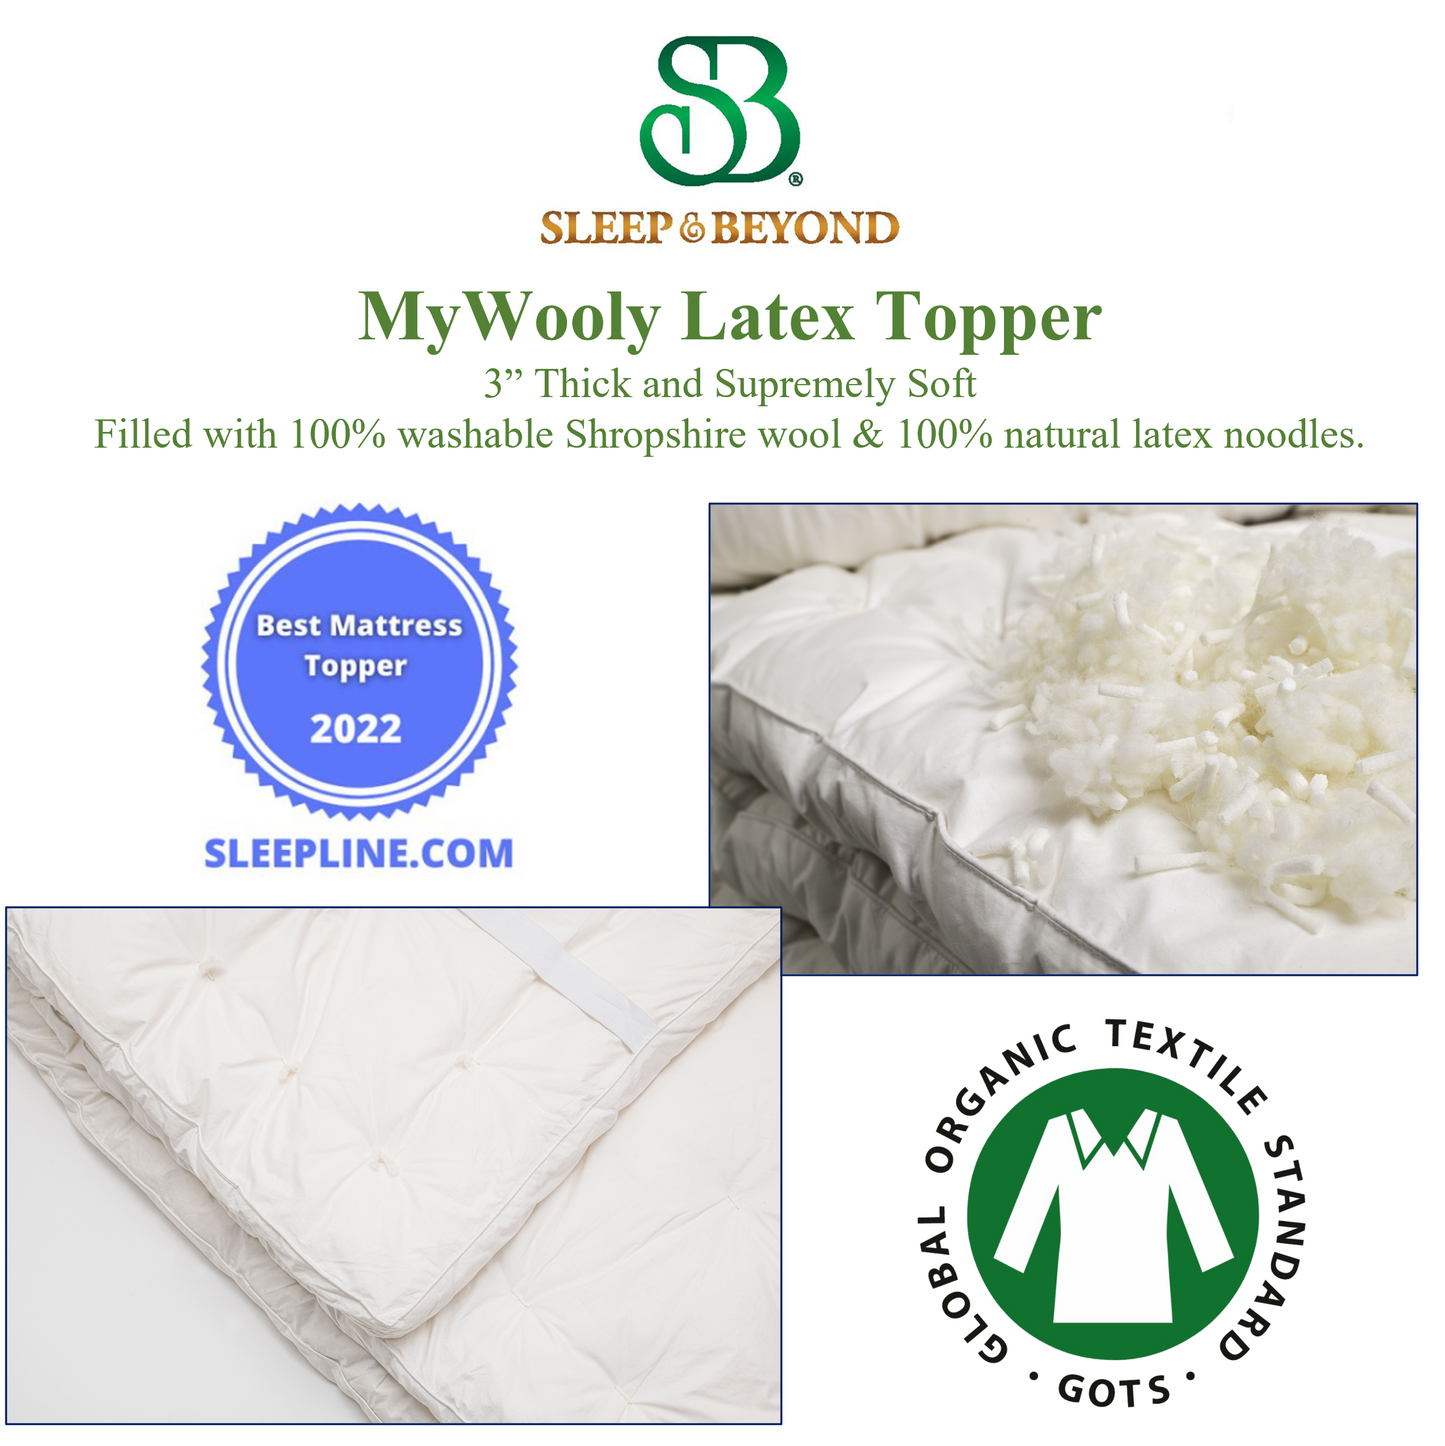 myWoolly Latex Topper